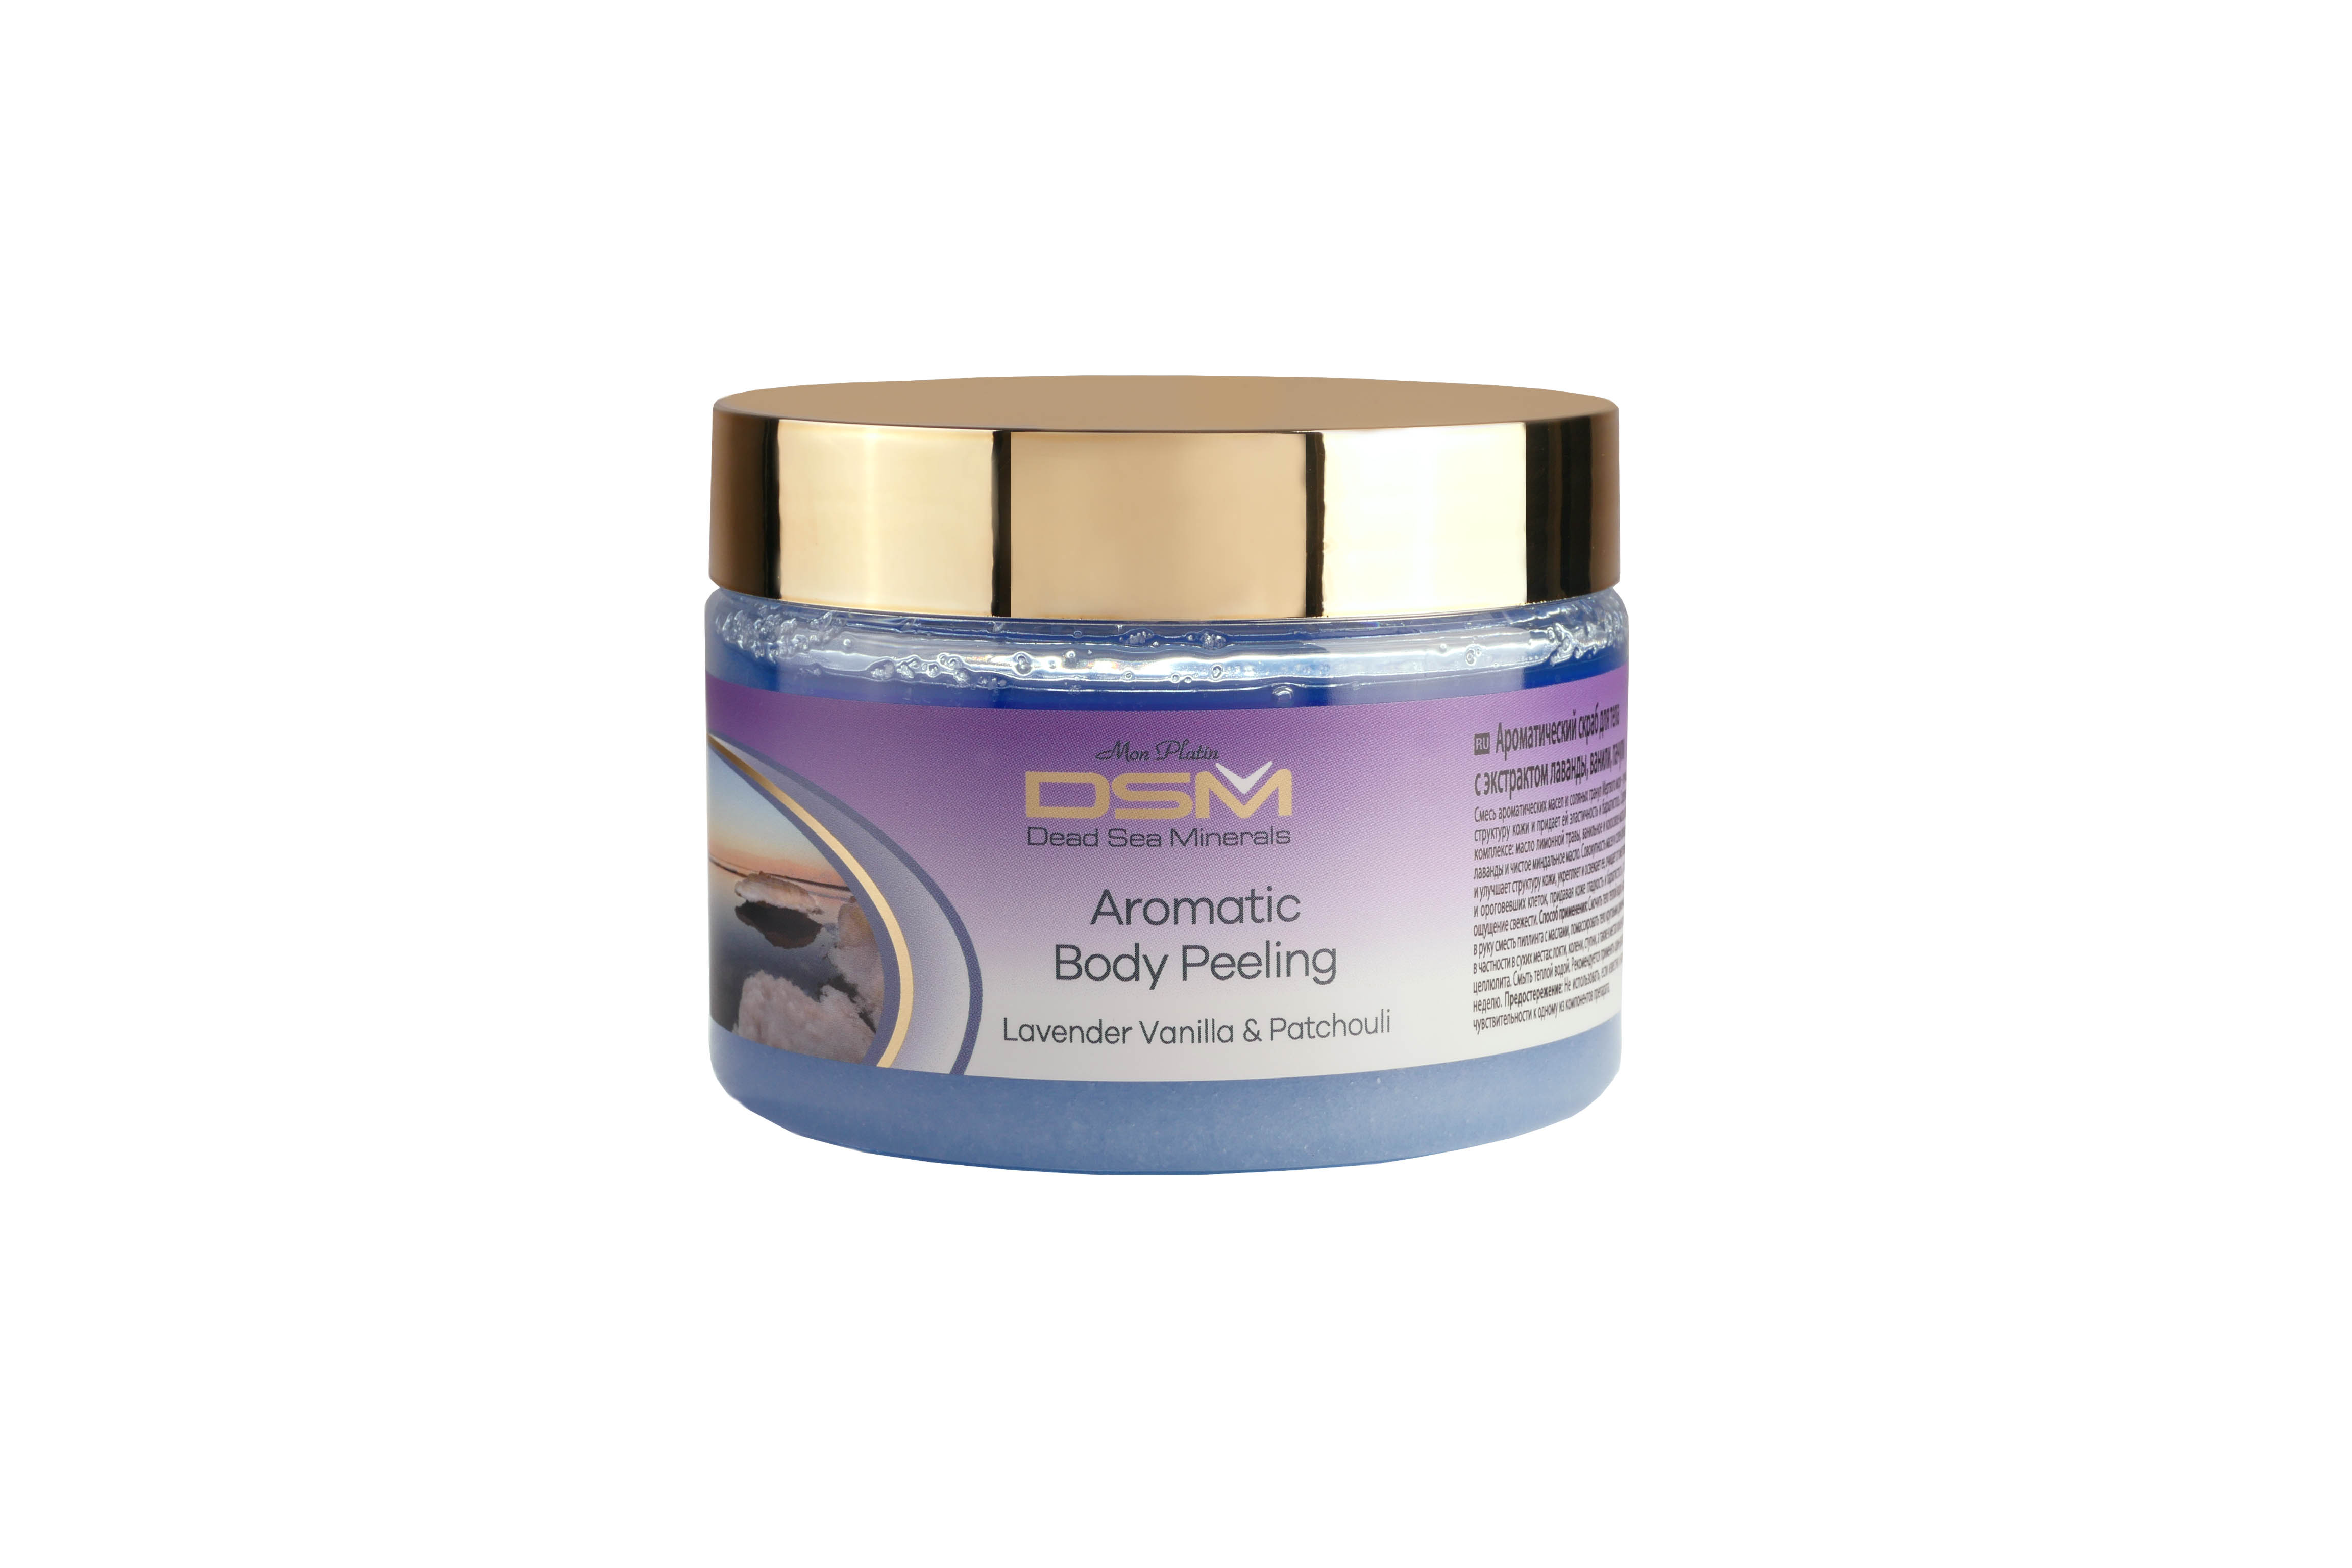 Aromatic Body Peeling scented with bright smell of Lavender and Vanilla Patchouli